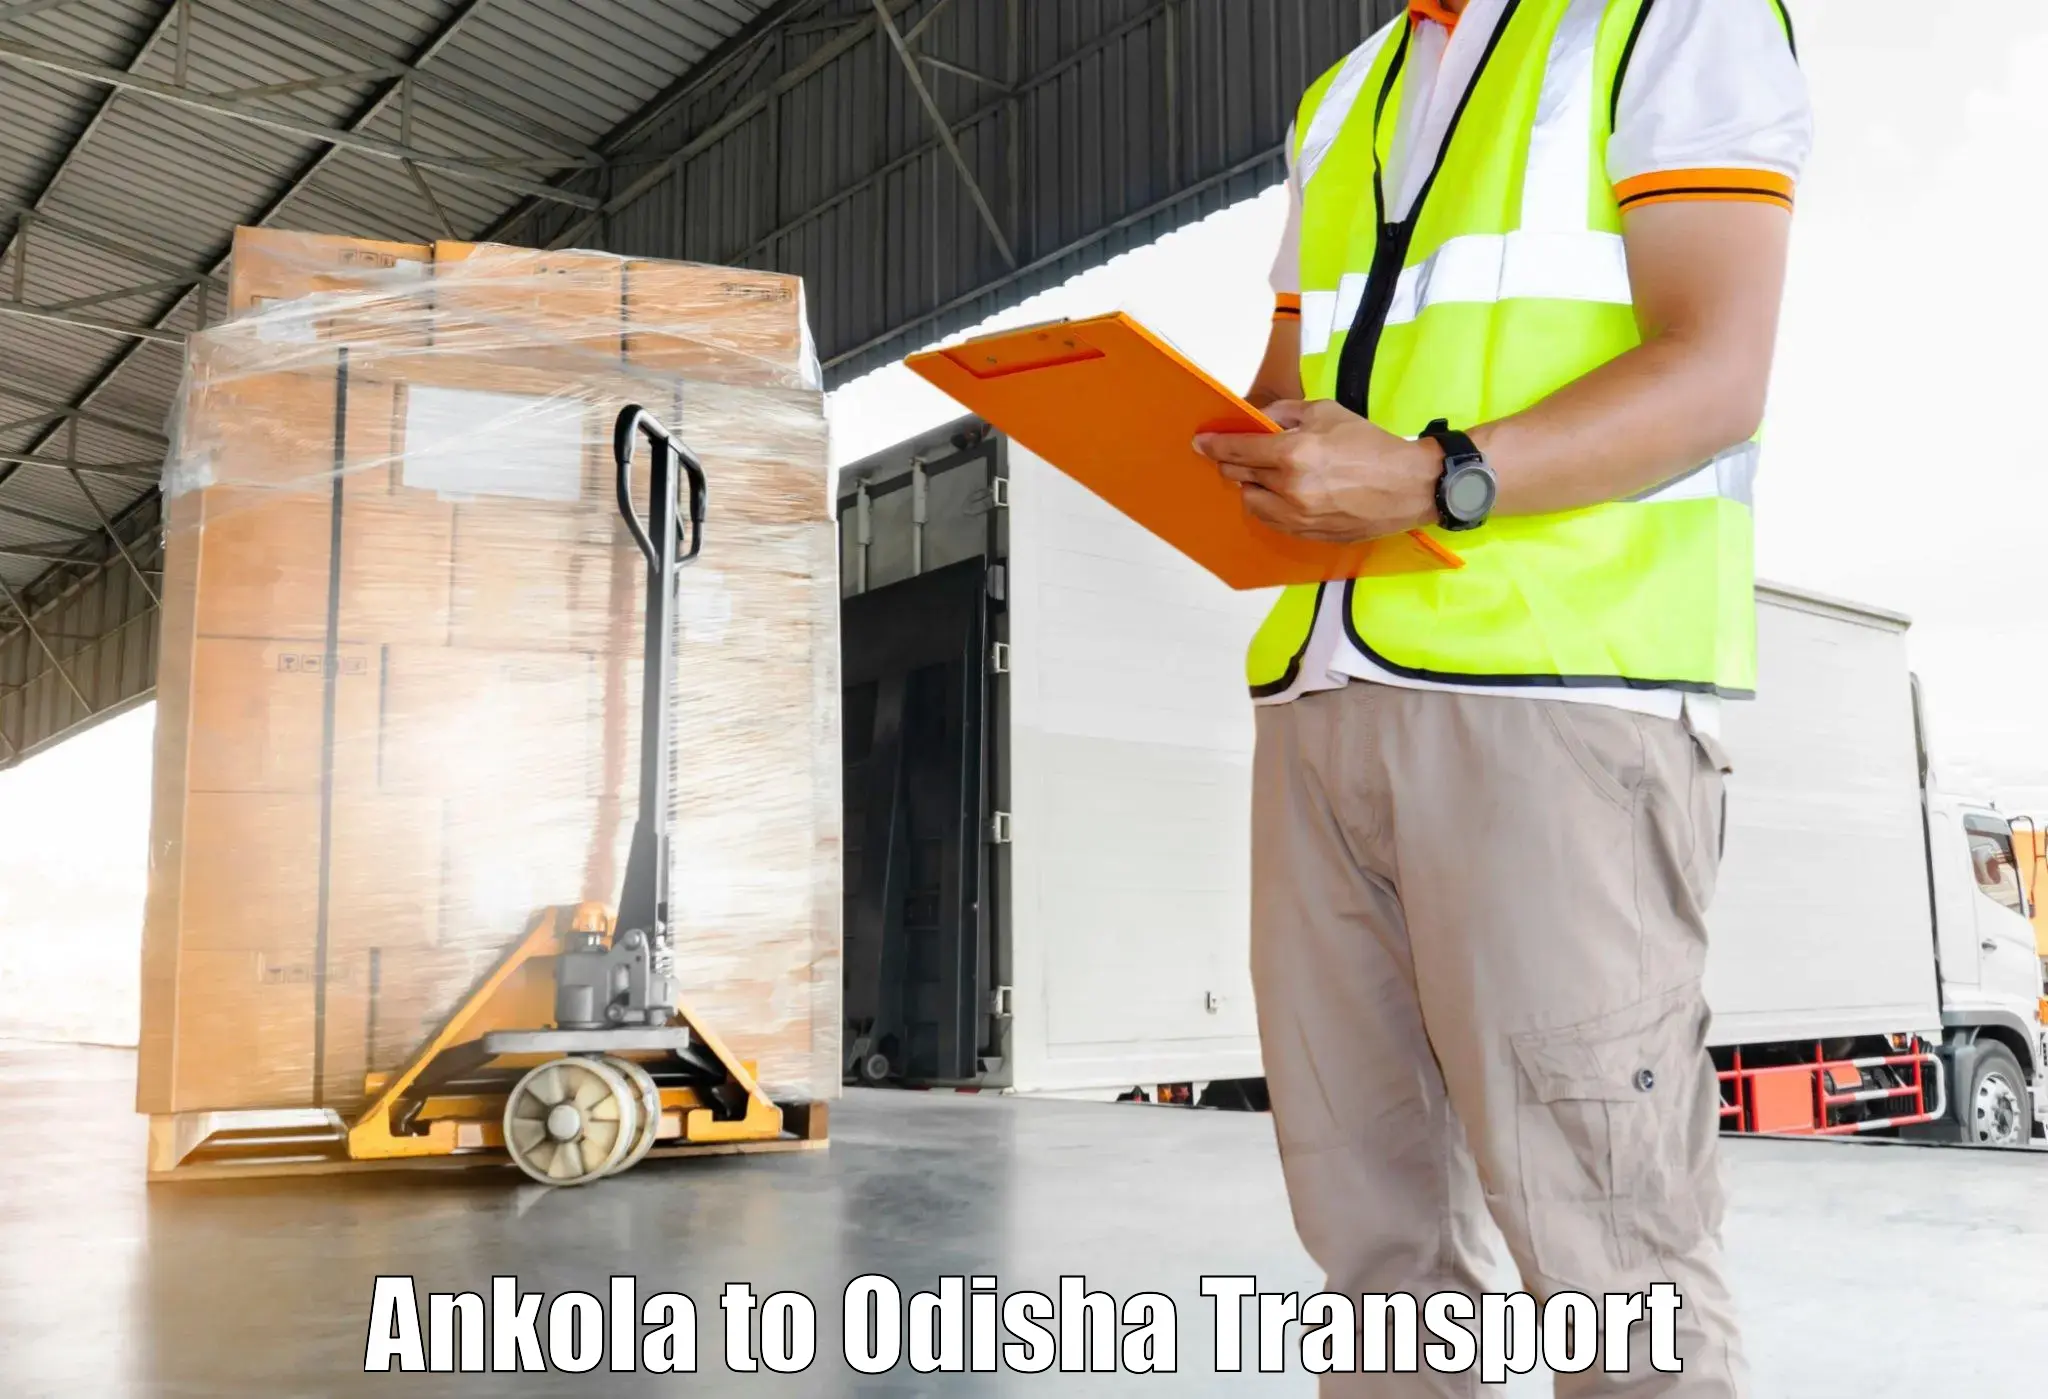 Truck transport companies in India Ankola to Bonth